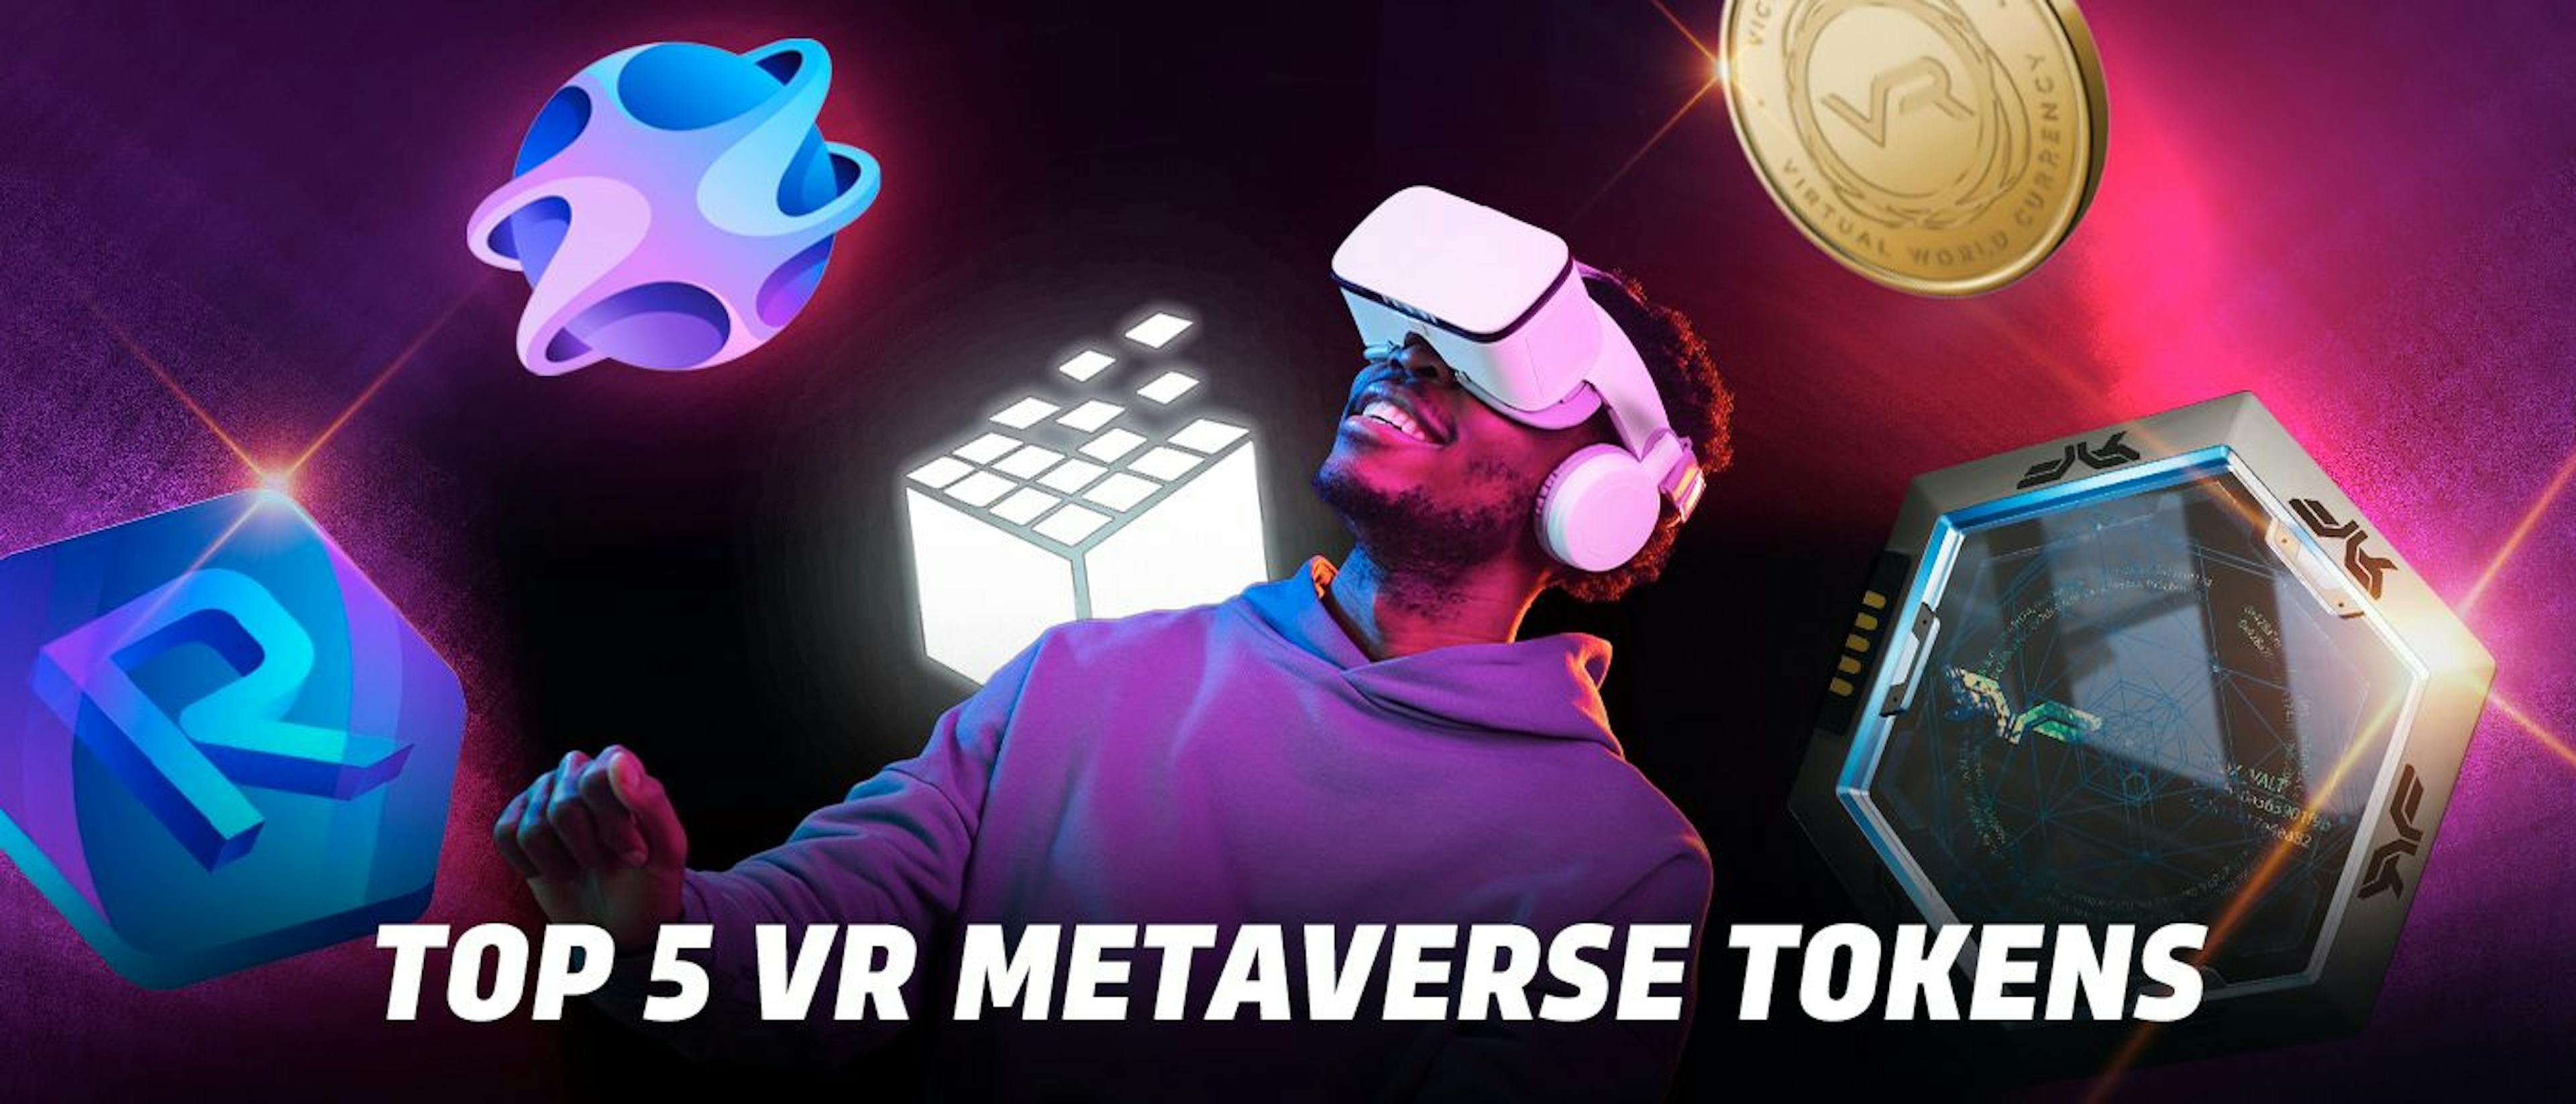 featured image - Blockchain Pokémon and Monetized NFTs: 5 Tokens Enabling VR in the Metaverse